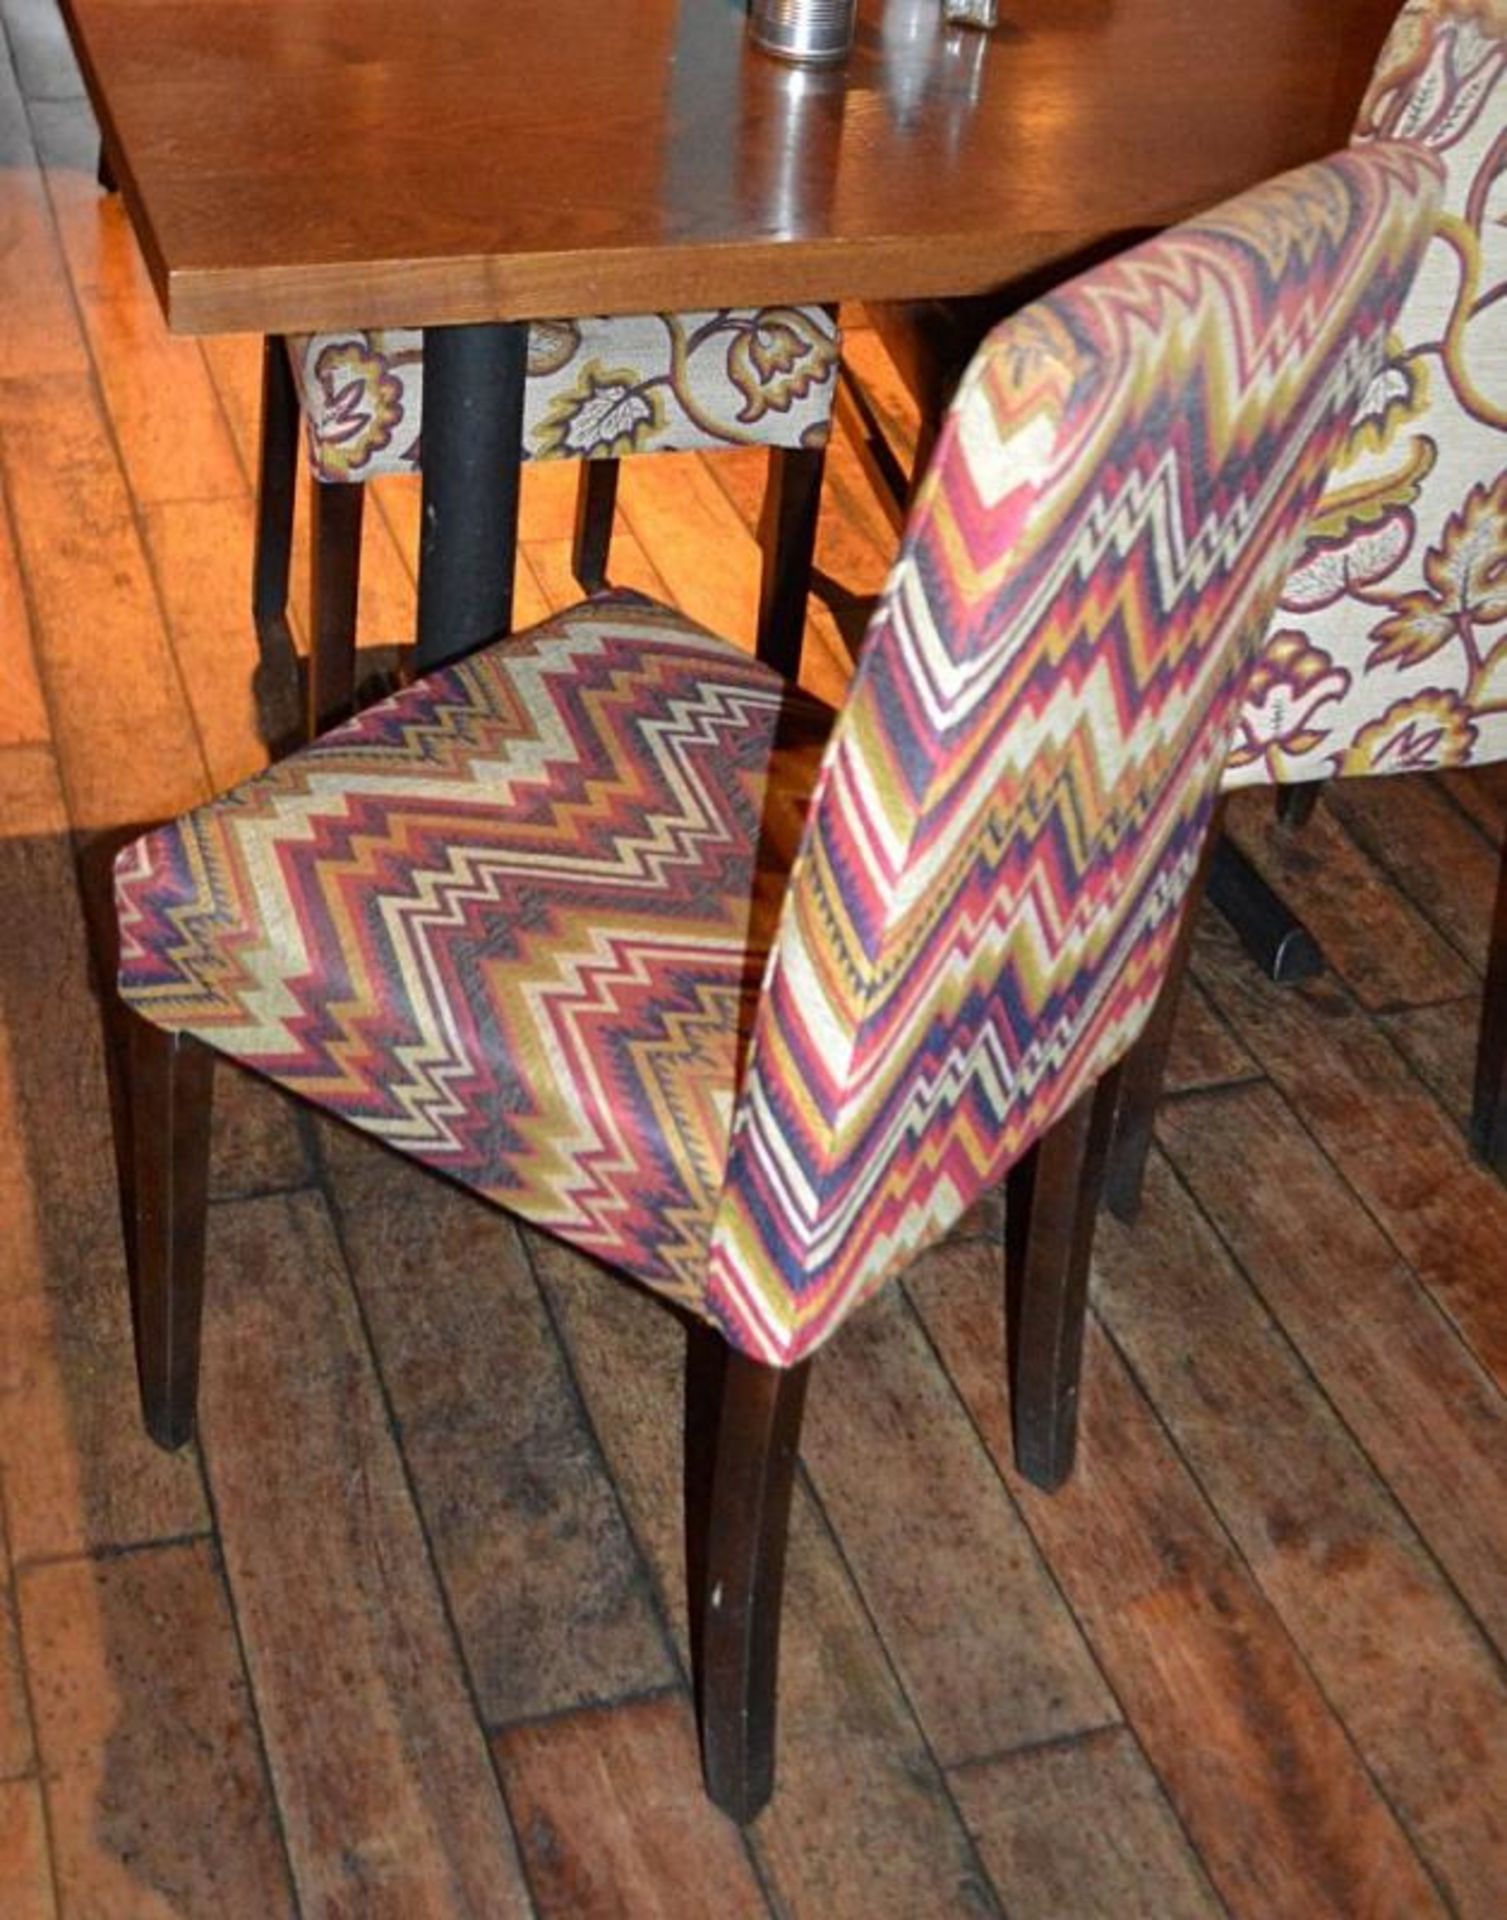 5 x Upholstered Restaurant Dining Chairs In A Zig Zag Mexican-style Fabric - Image 2 of 2